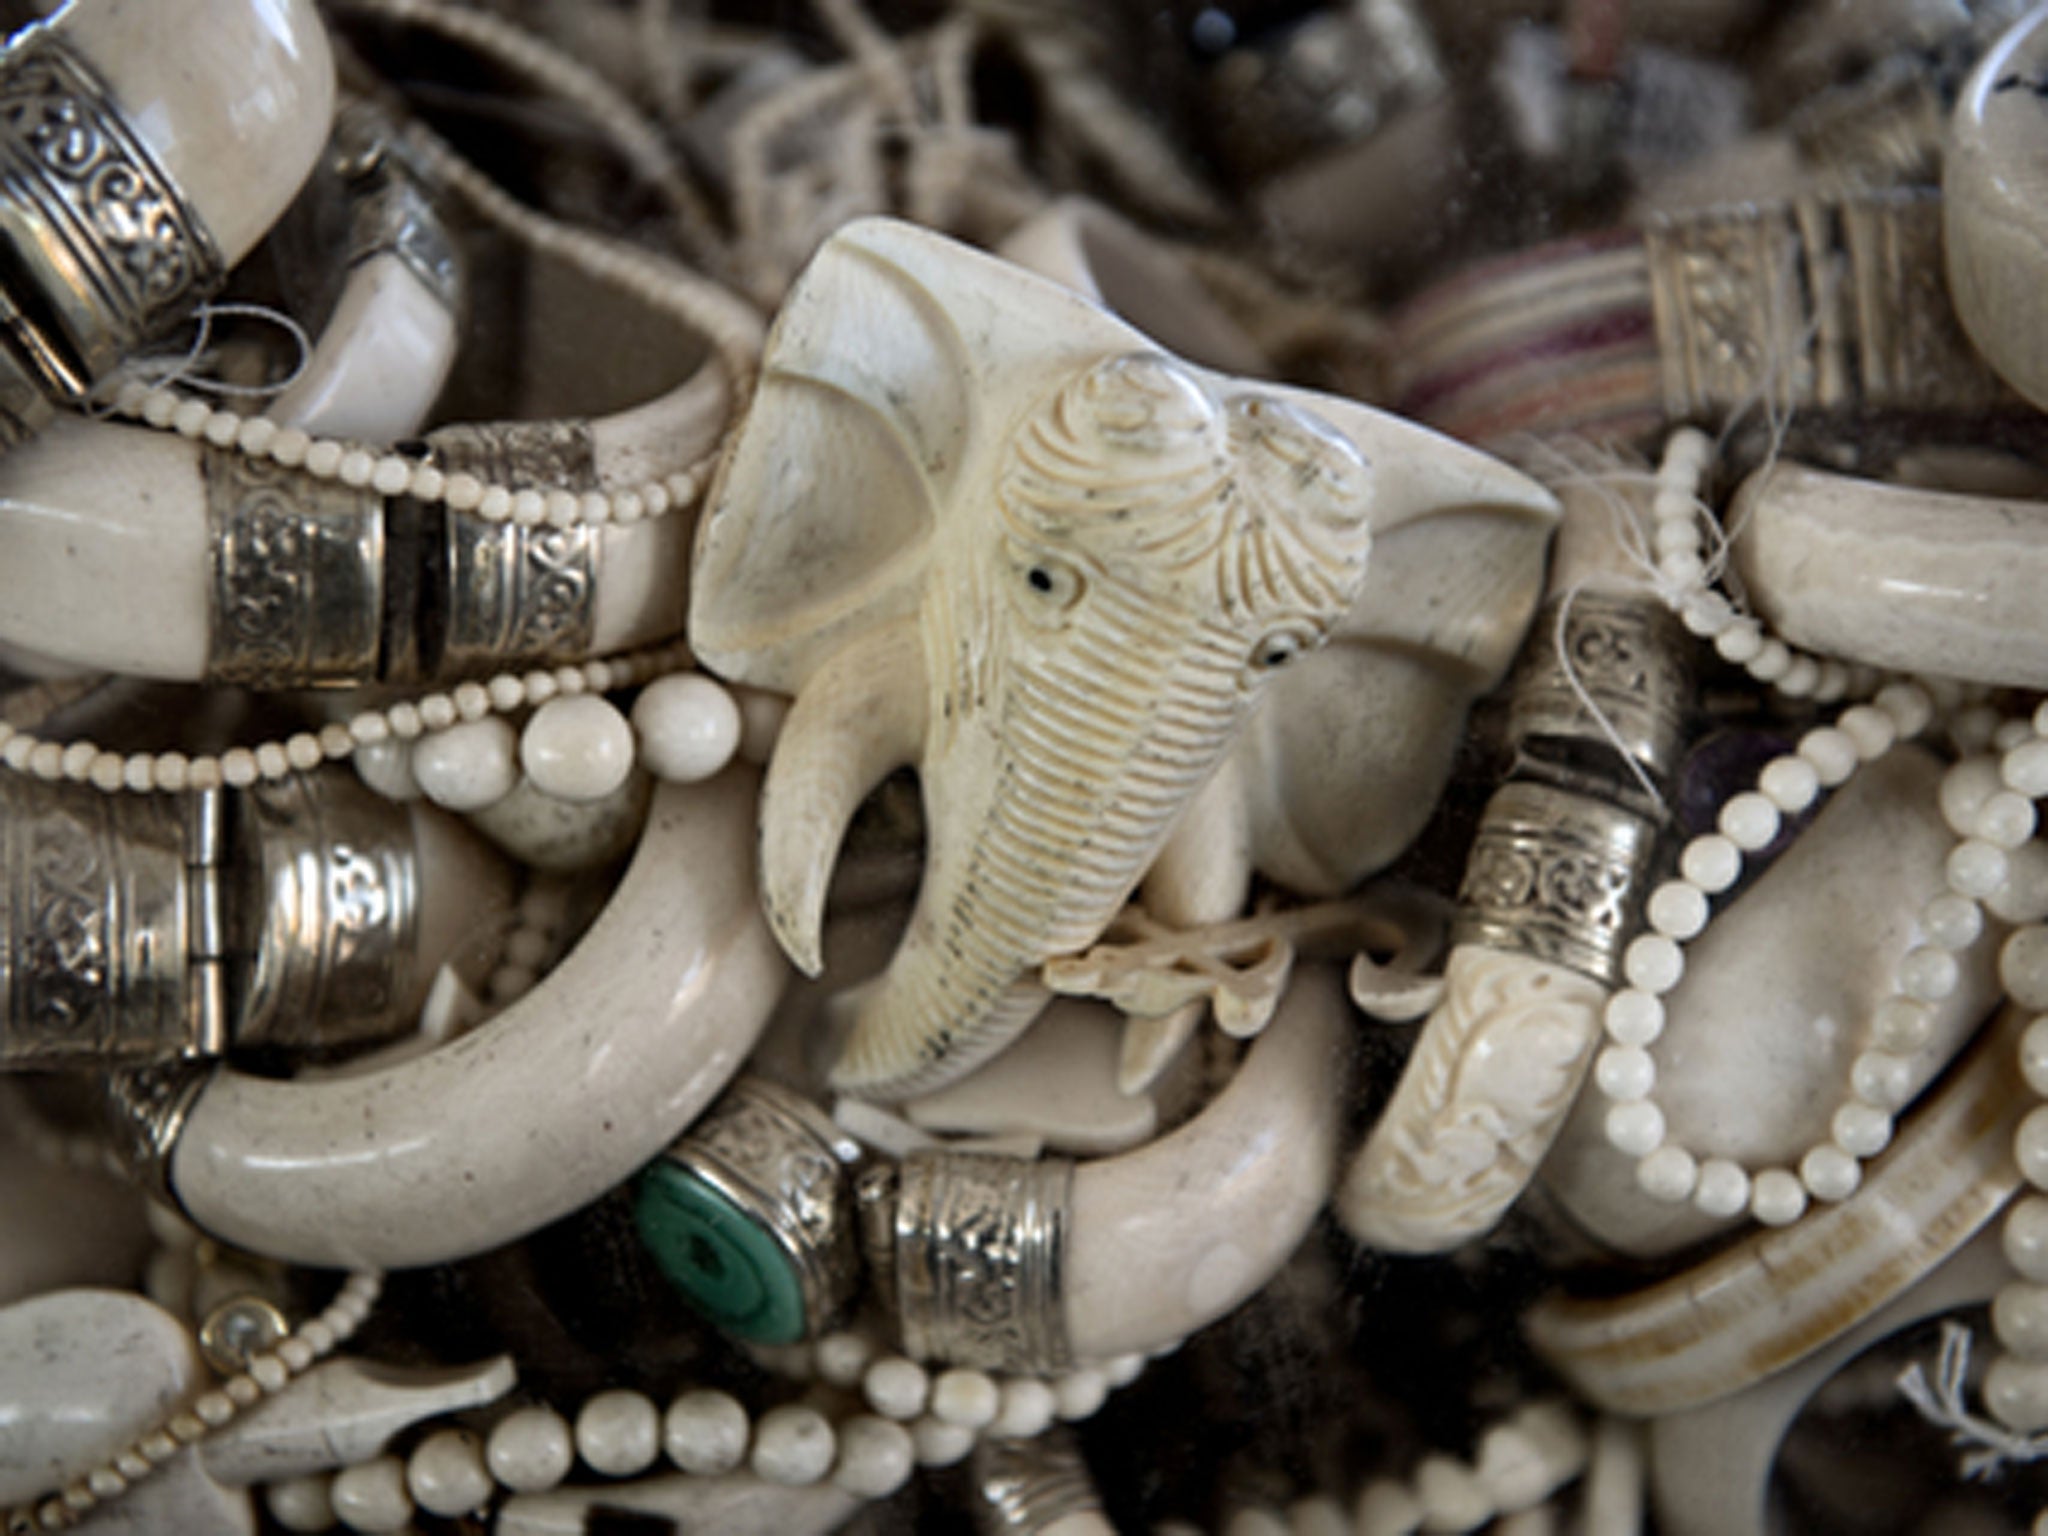 Trinkets and jewelry made from ivory are prepared to be crushed. The U.S. accounts for the second largest market for ivory in the world after China